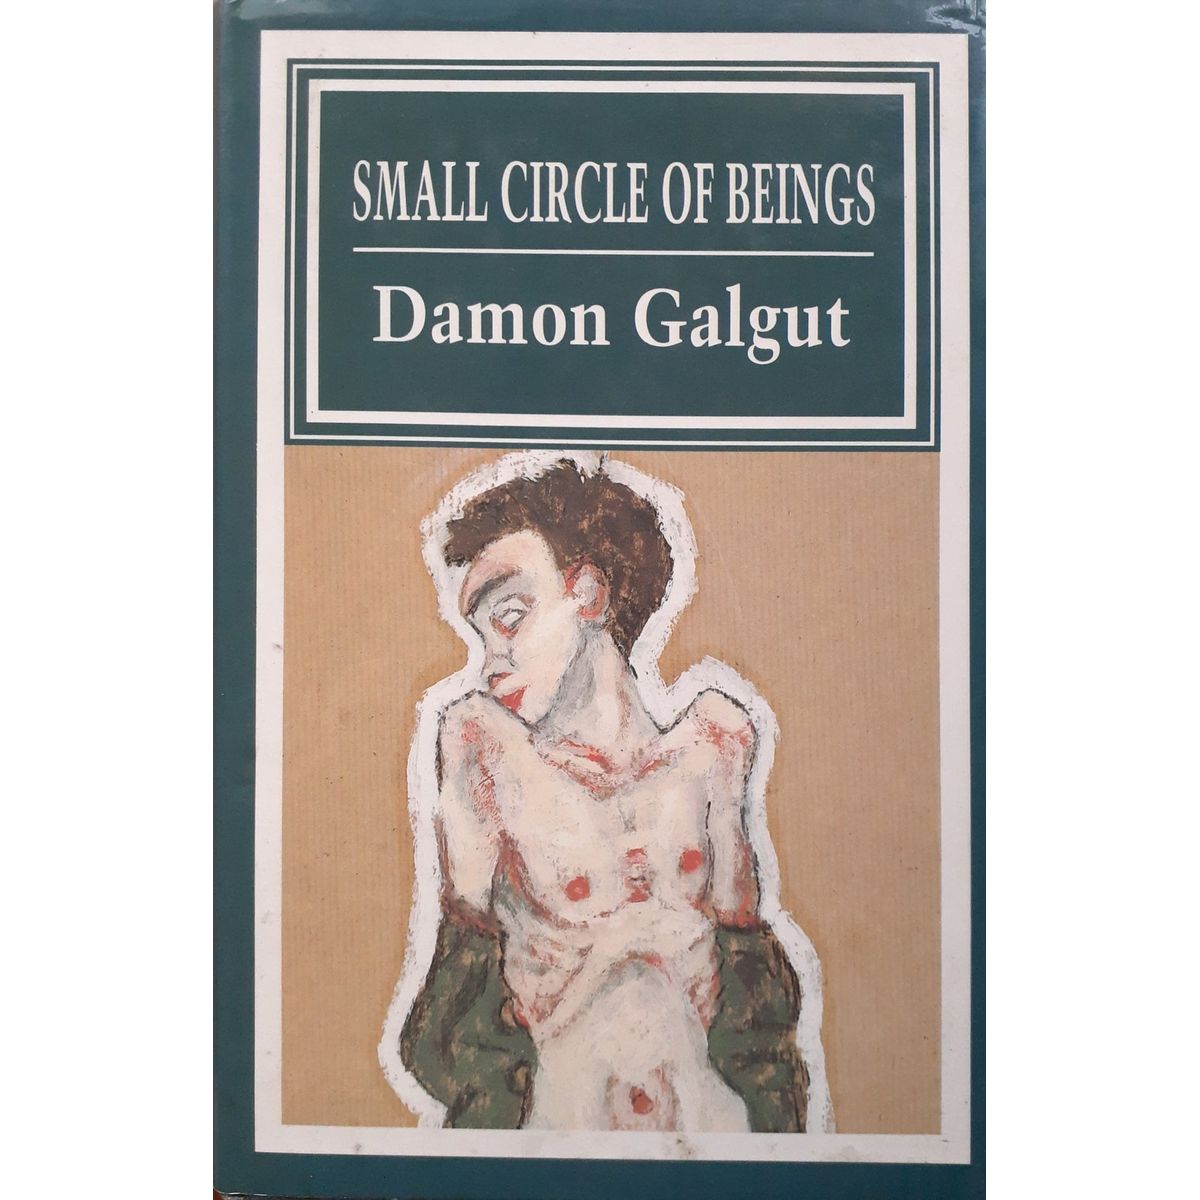 ISBN: 9780947042387 / 0947042385 - Small Circle of Beings by Damon Galgut, 1st Edition [1988]